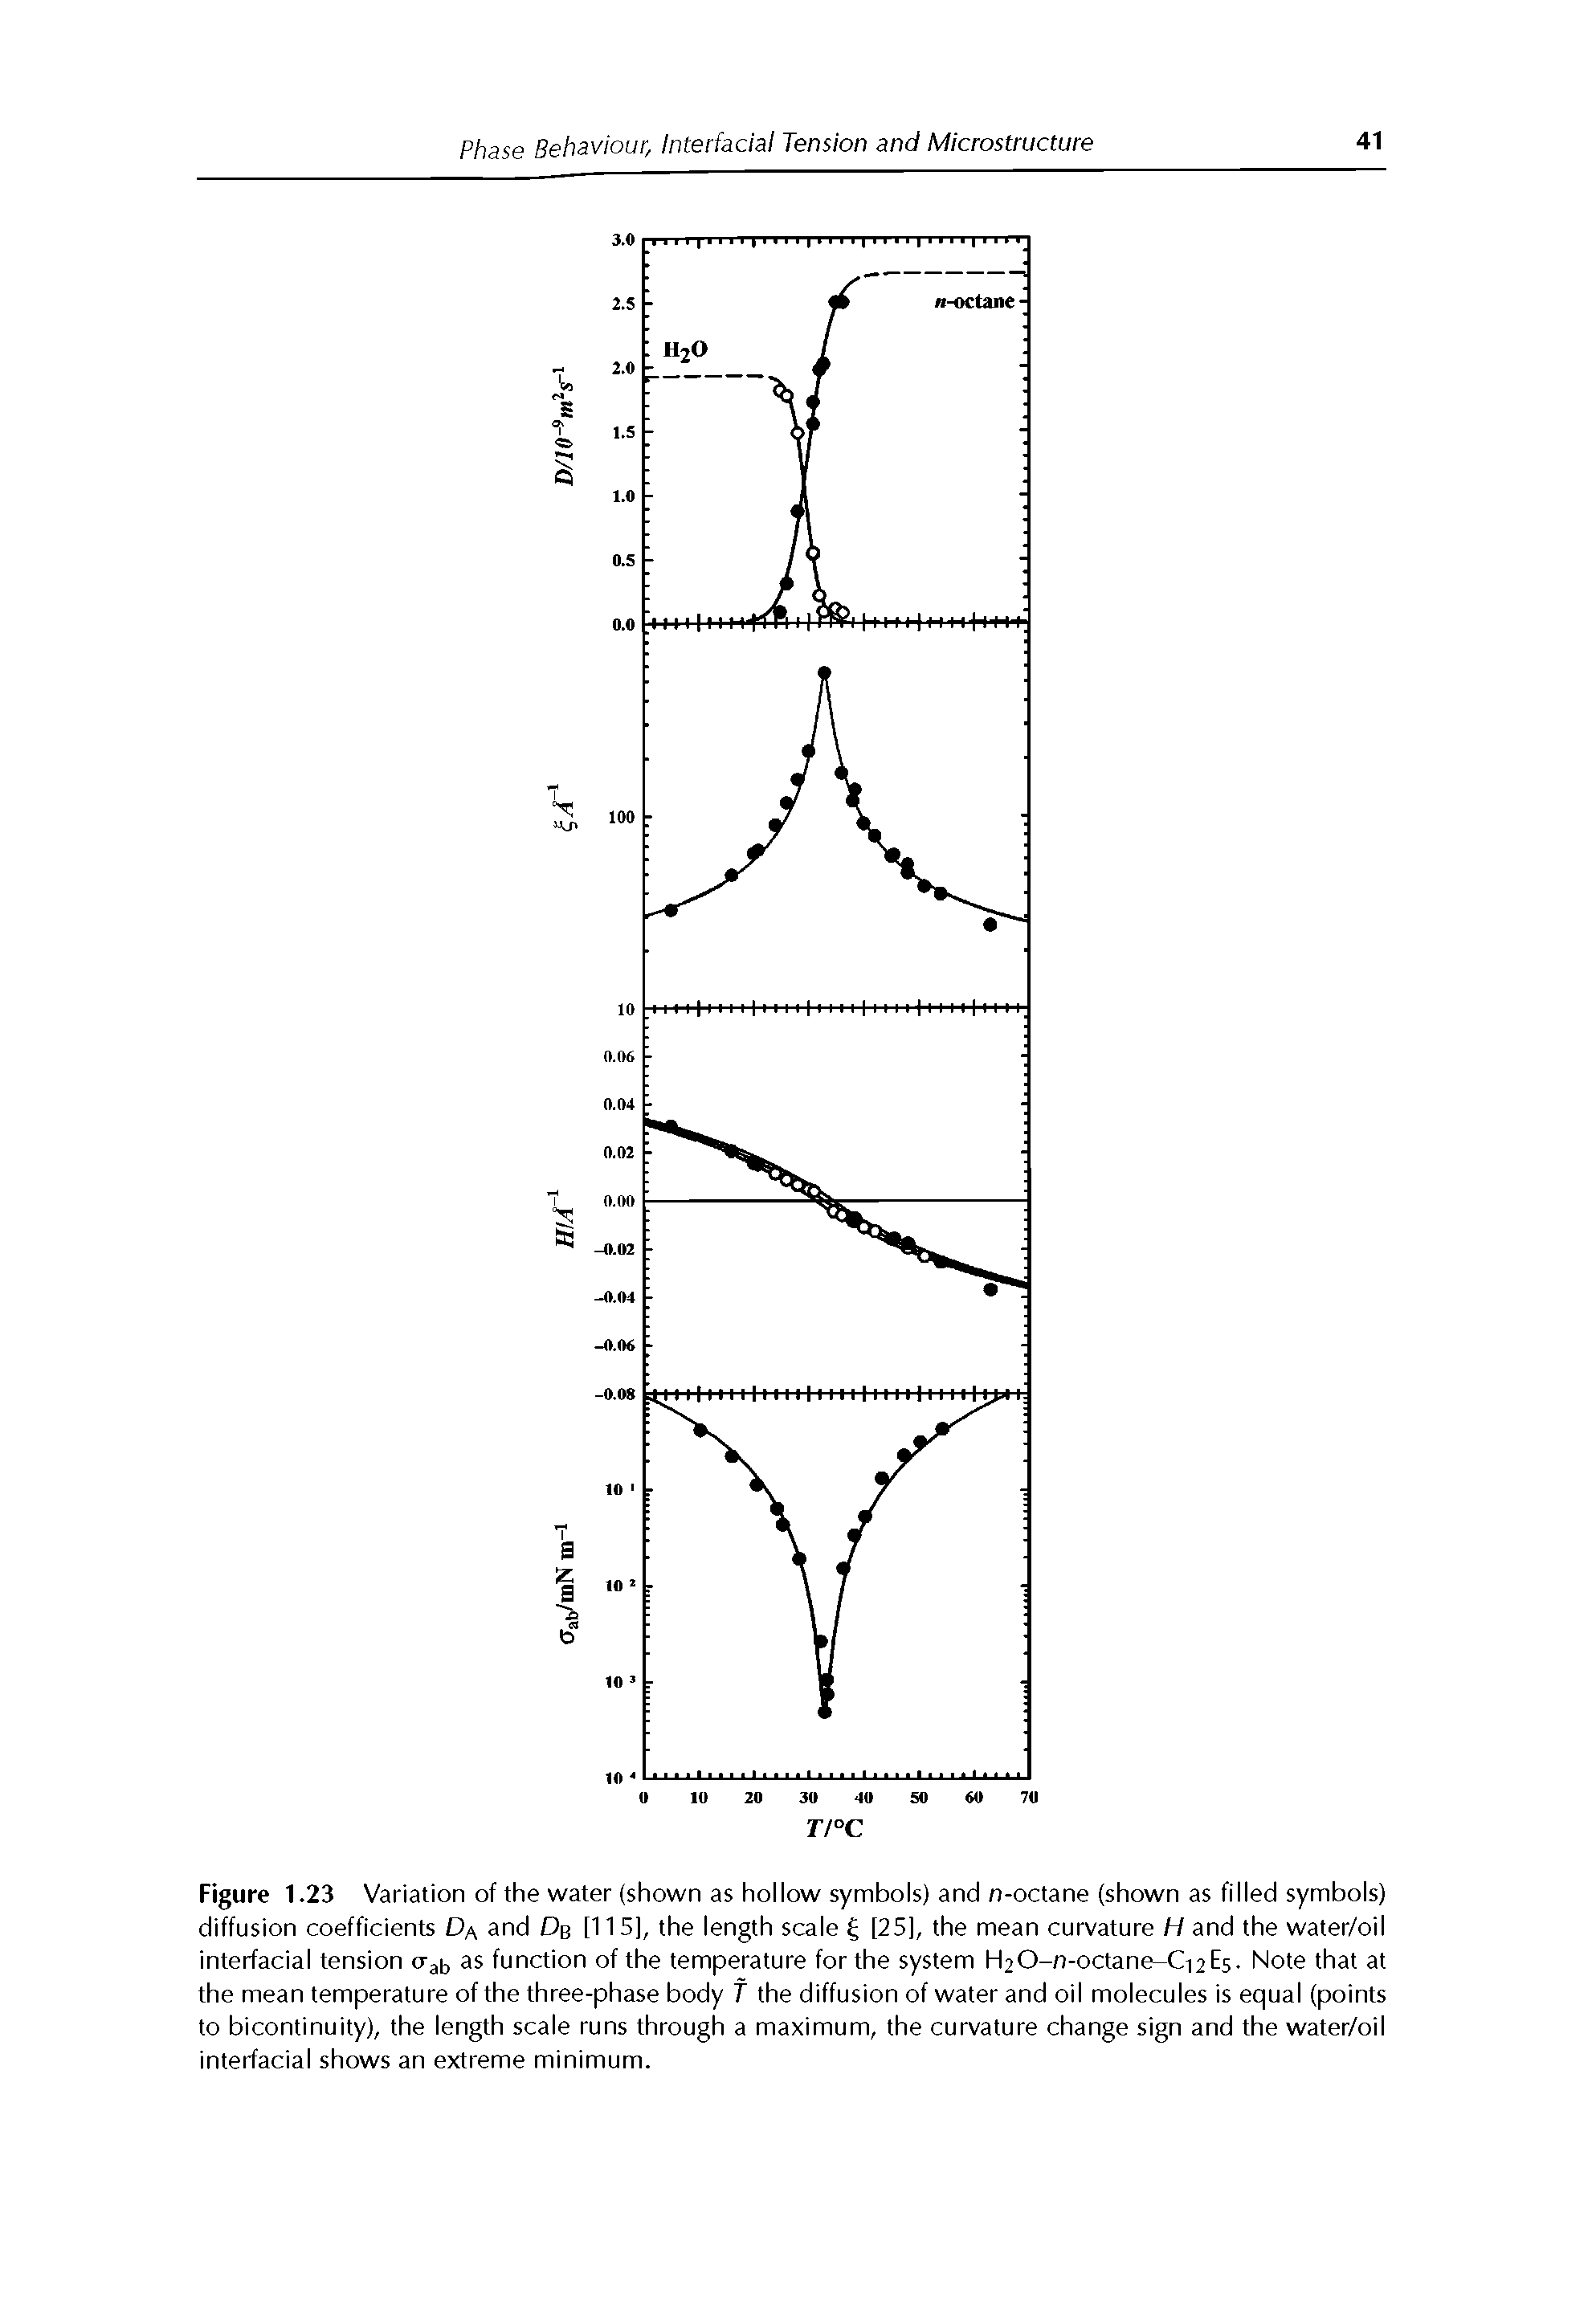 Figure 1.23 Variation of the water (shown as hollow symbols) and n-octane (shown as filled symbols) diffusion coefficients DA and Dg [115], the length scale [25], the mean curvature H and the water/oil interfacial tension (jat, as function of the temperature for the system hbO-n-octane-CnEs. Note that at the mean temperature of the three-phase body f the diffusion of water and oil molecules is equal (points to bicontinuity), the length scale runs through a maximum, the curvature change sign and the water/oil interfacial shows an extreme minimum.